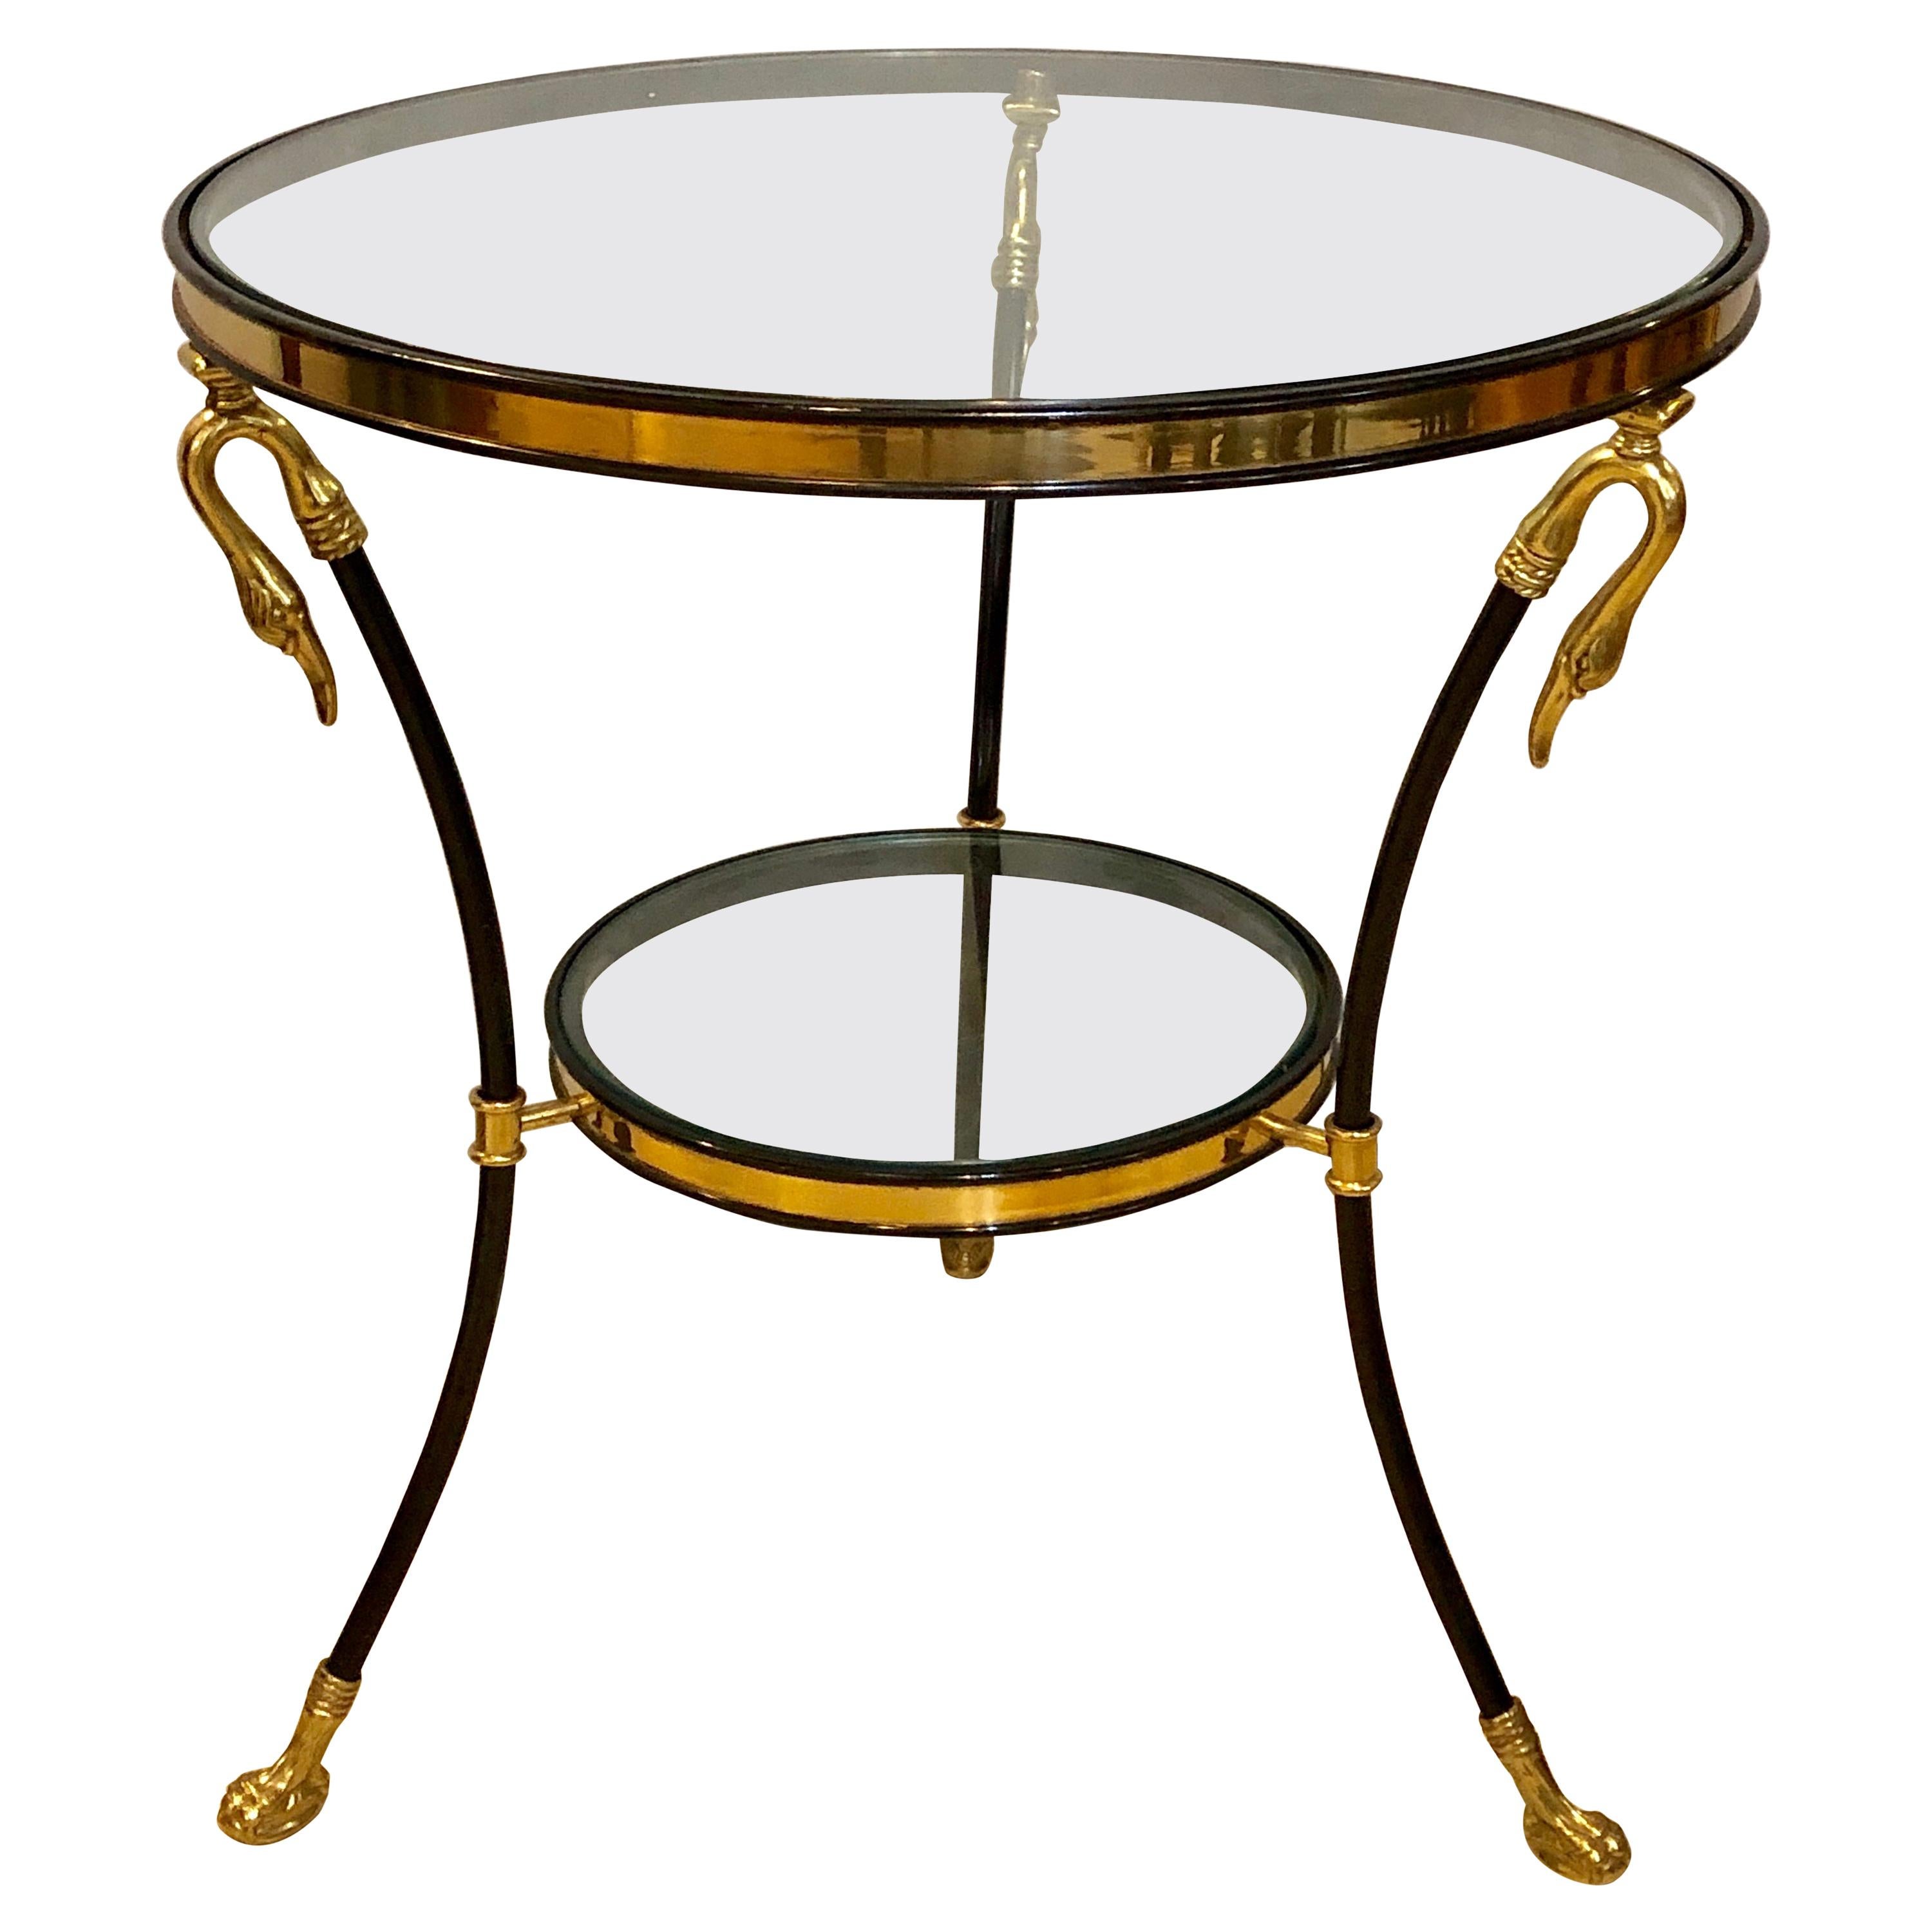 Neoclassical Style Brass and Ebony Steel Bouilliotte Table with Swan Heads